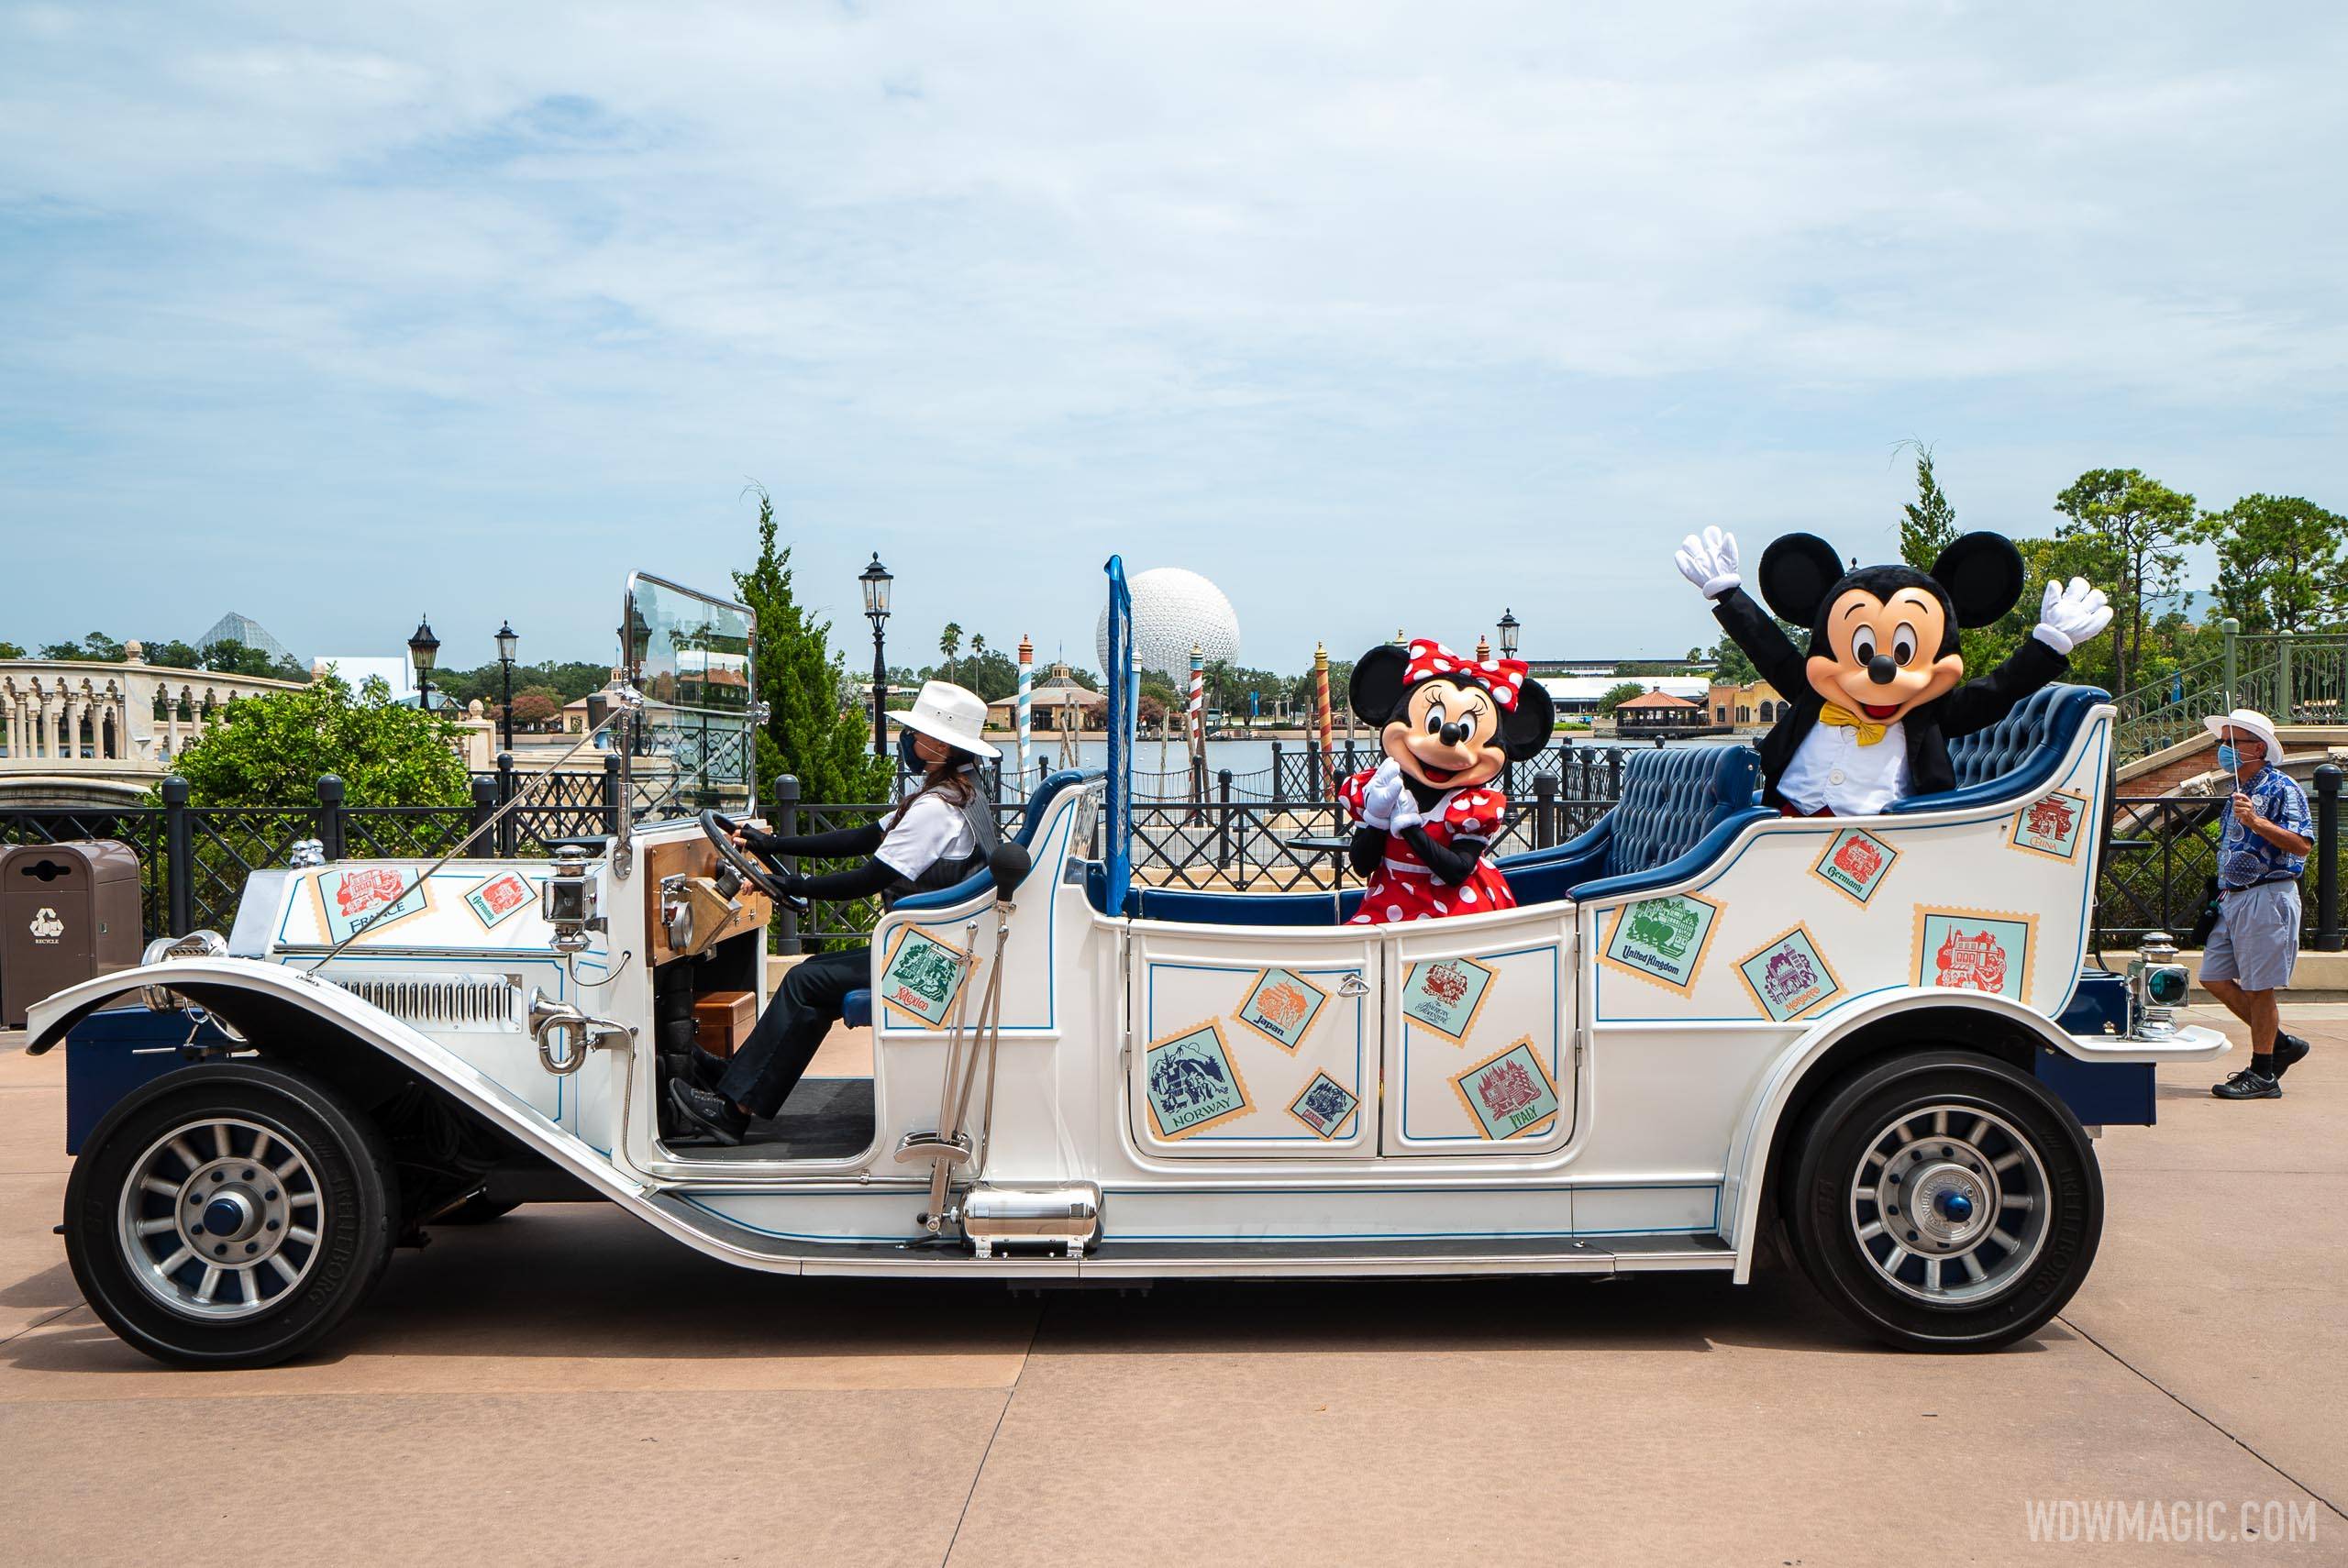 Minnie Mouse meet and greet at EPCOT to move to new location